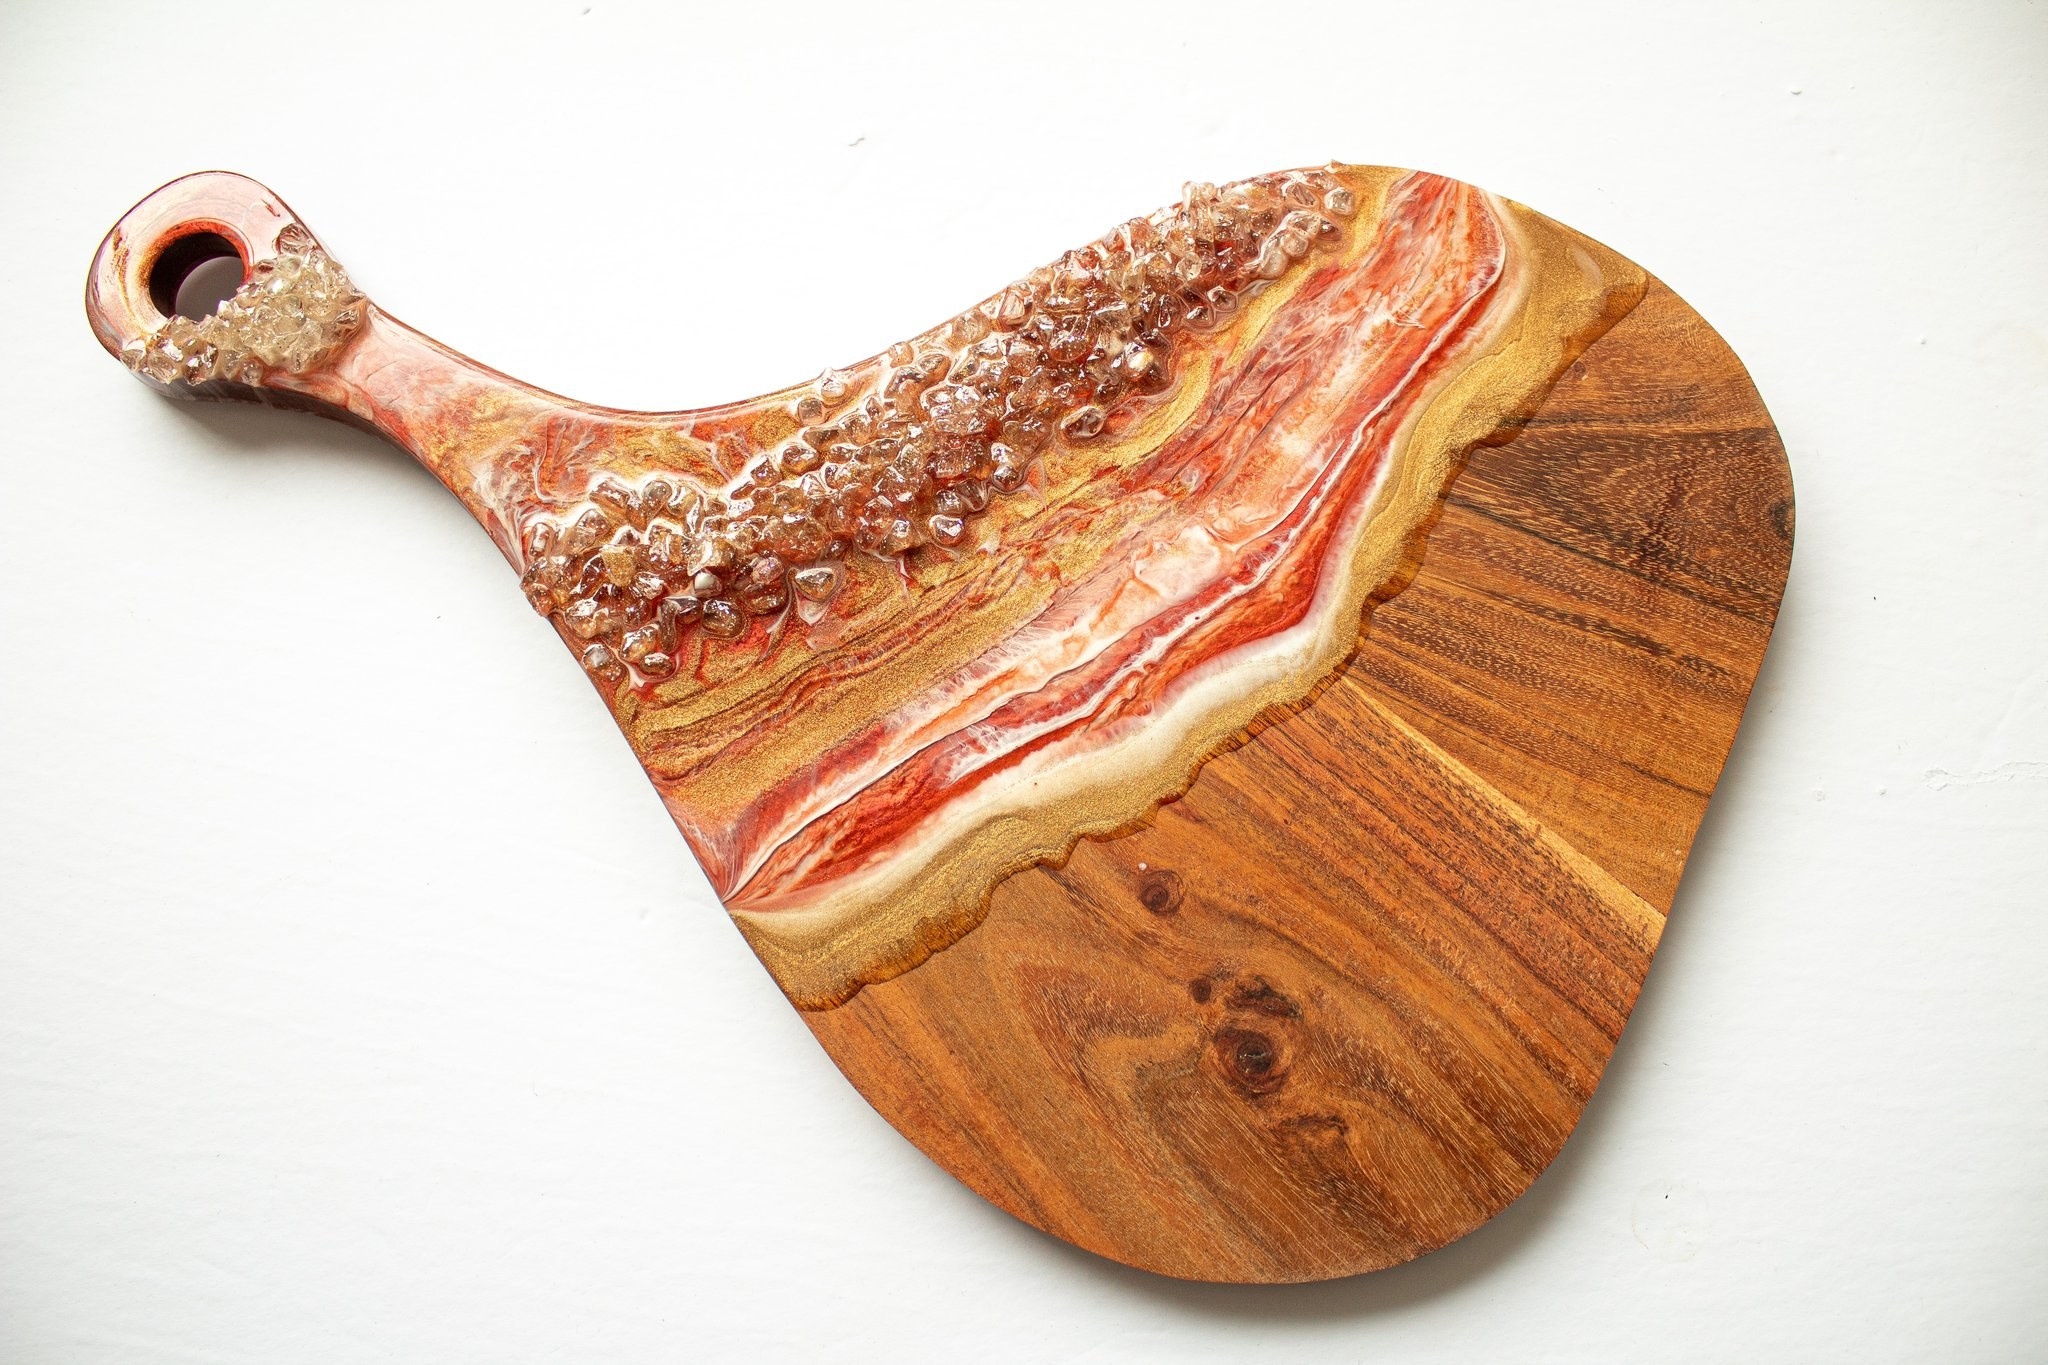 the paddle-shaped cutting board